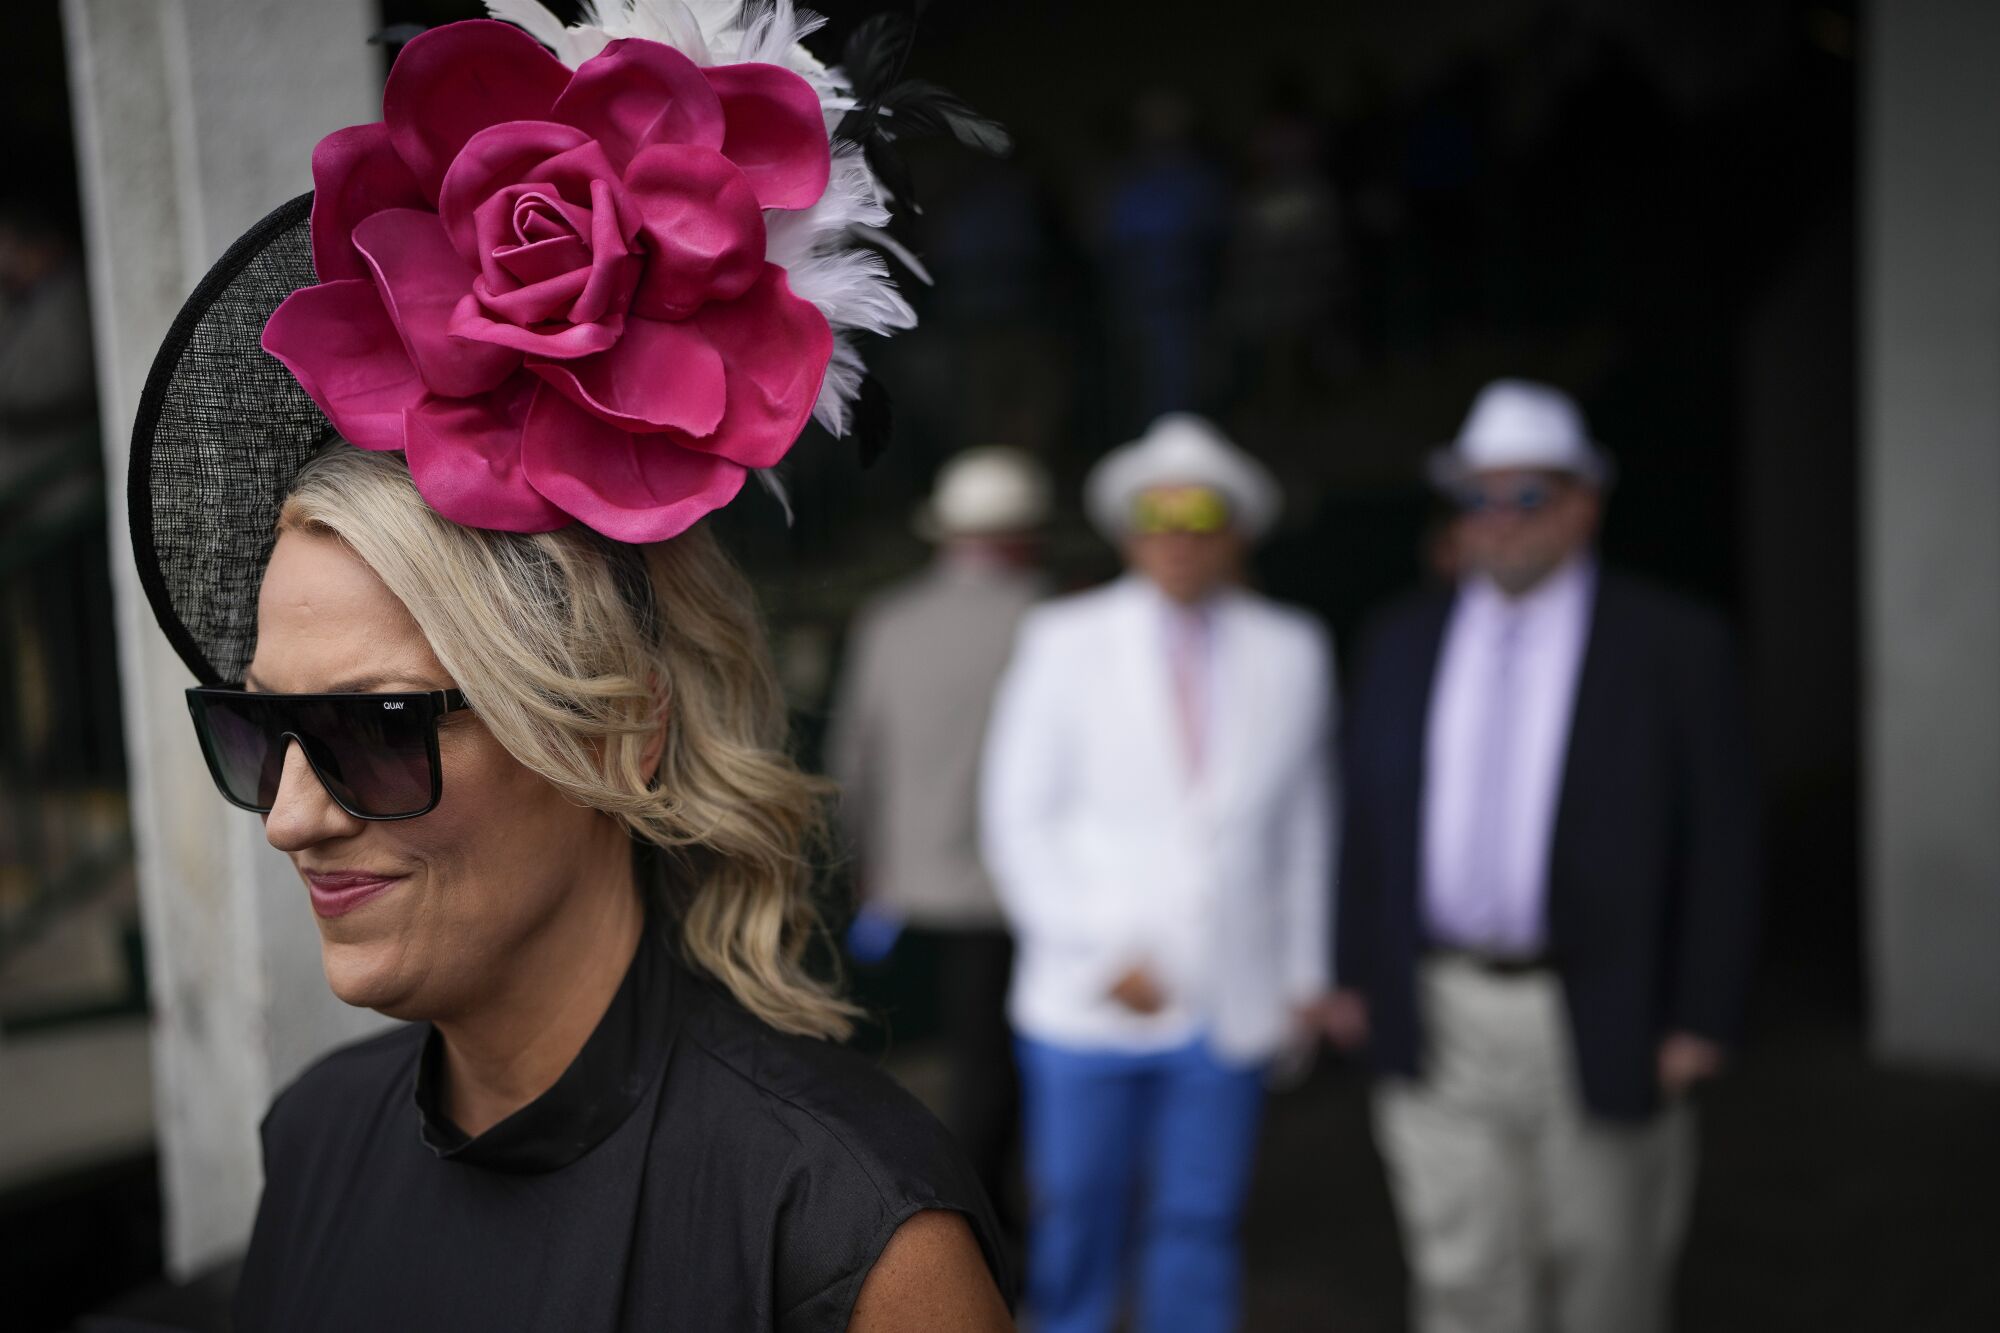 A woman wearing a hat with a large pink flower walks to her seat at Churchill Downs.